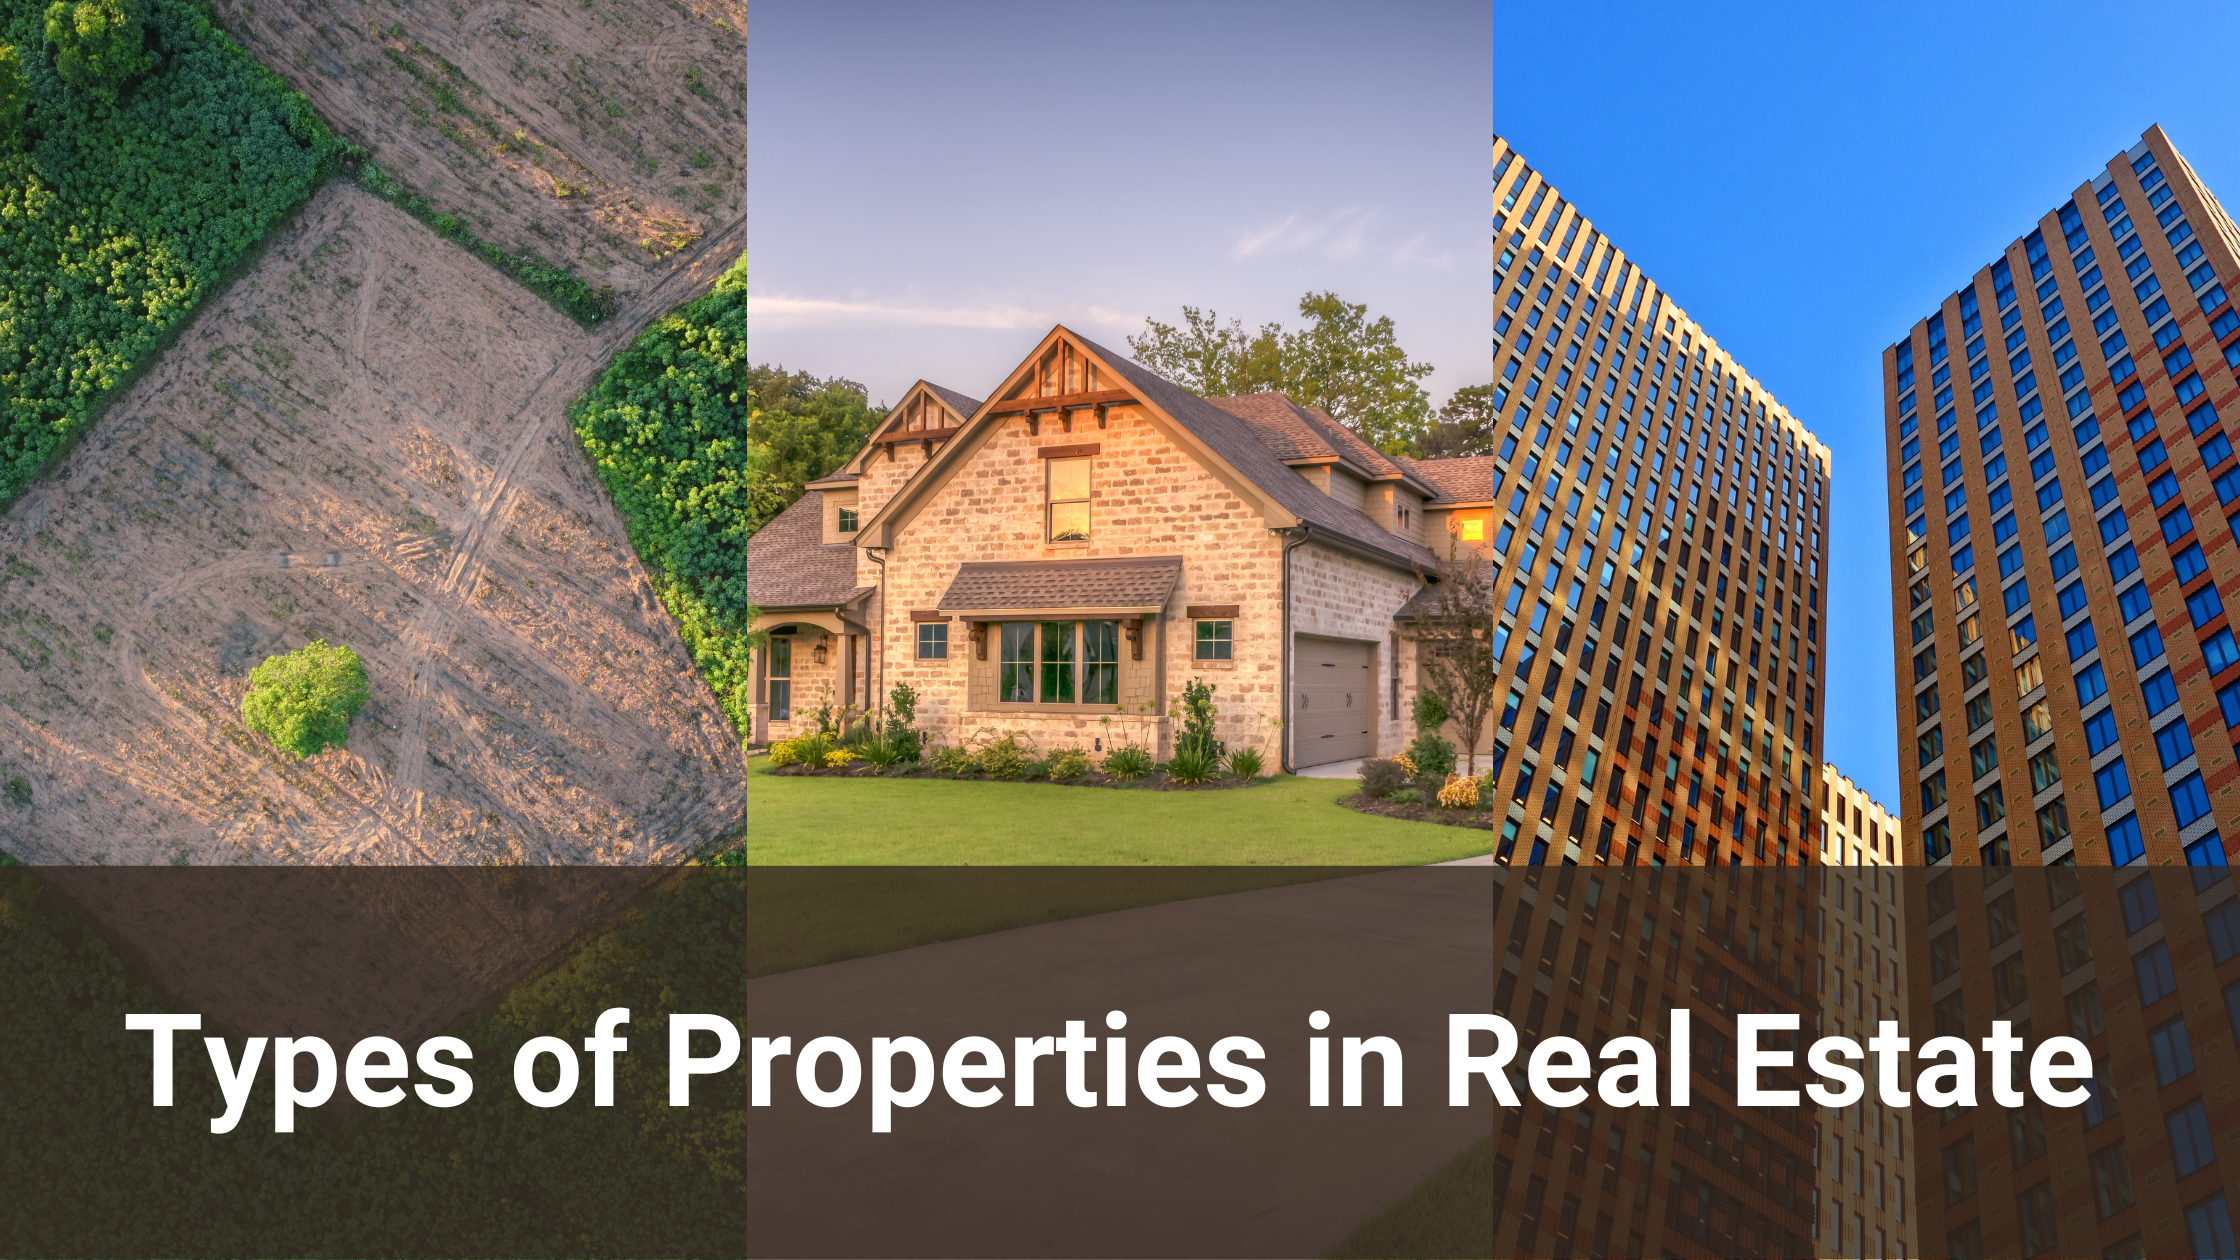 What are the Different Types of Real Estate?